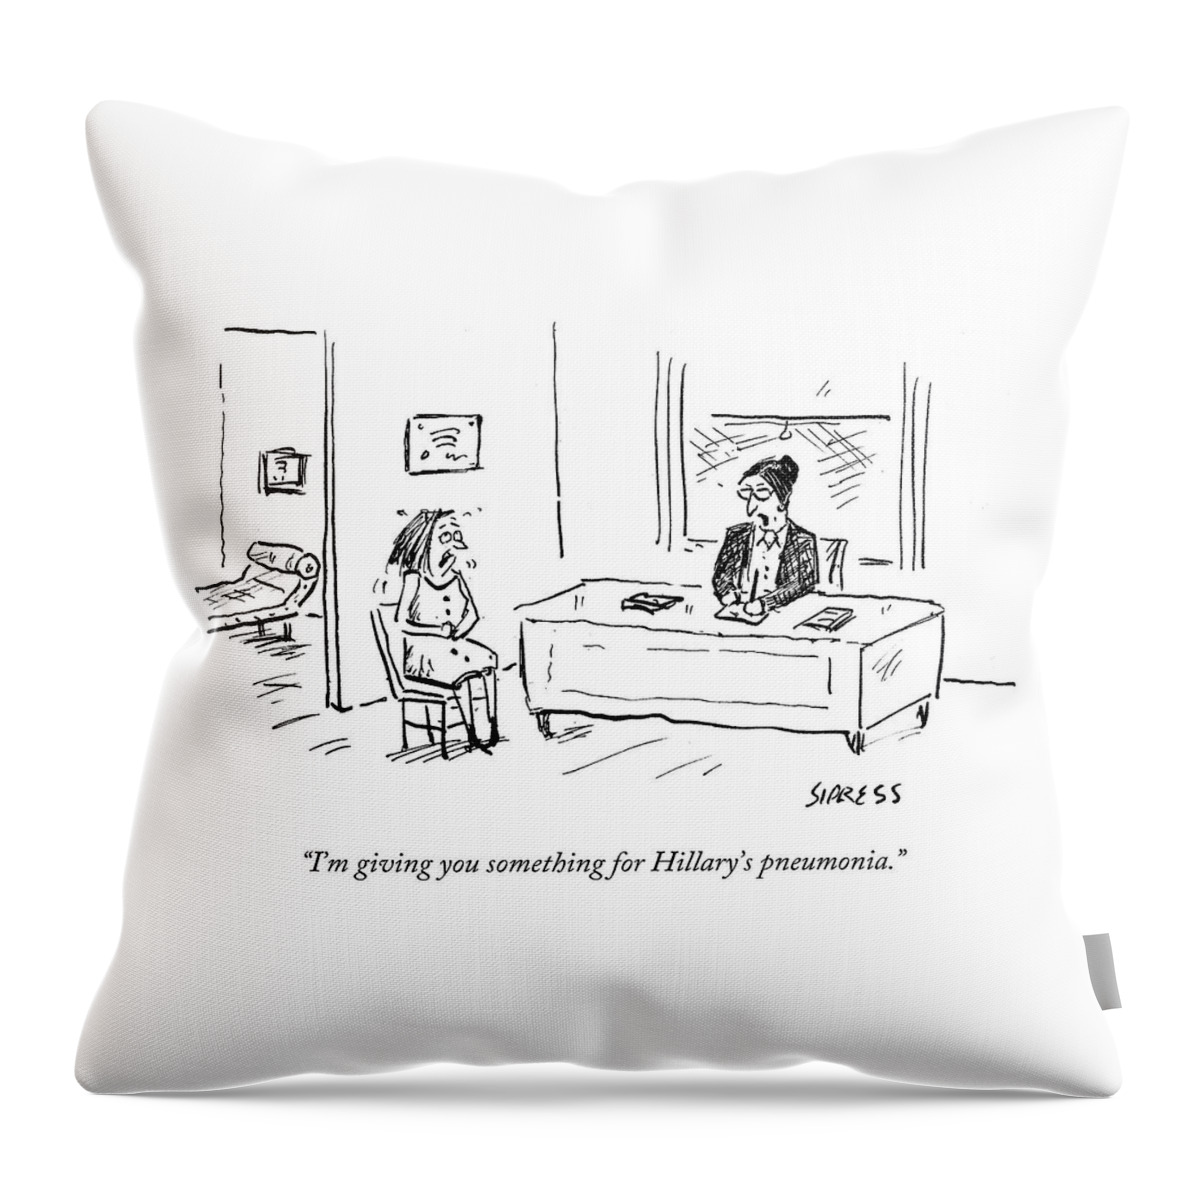 I'm Giving You Something For Hillary's Pneumonia Throw Pillow